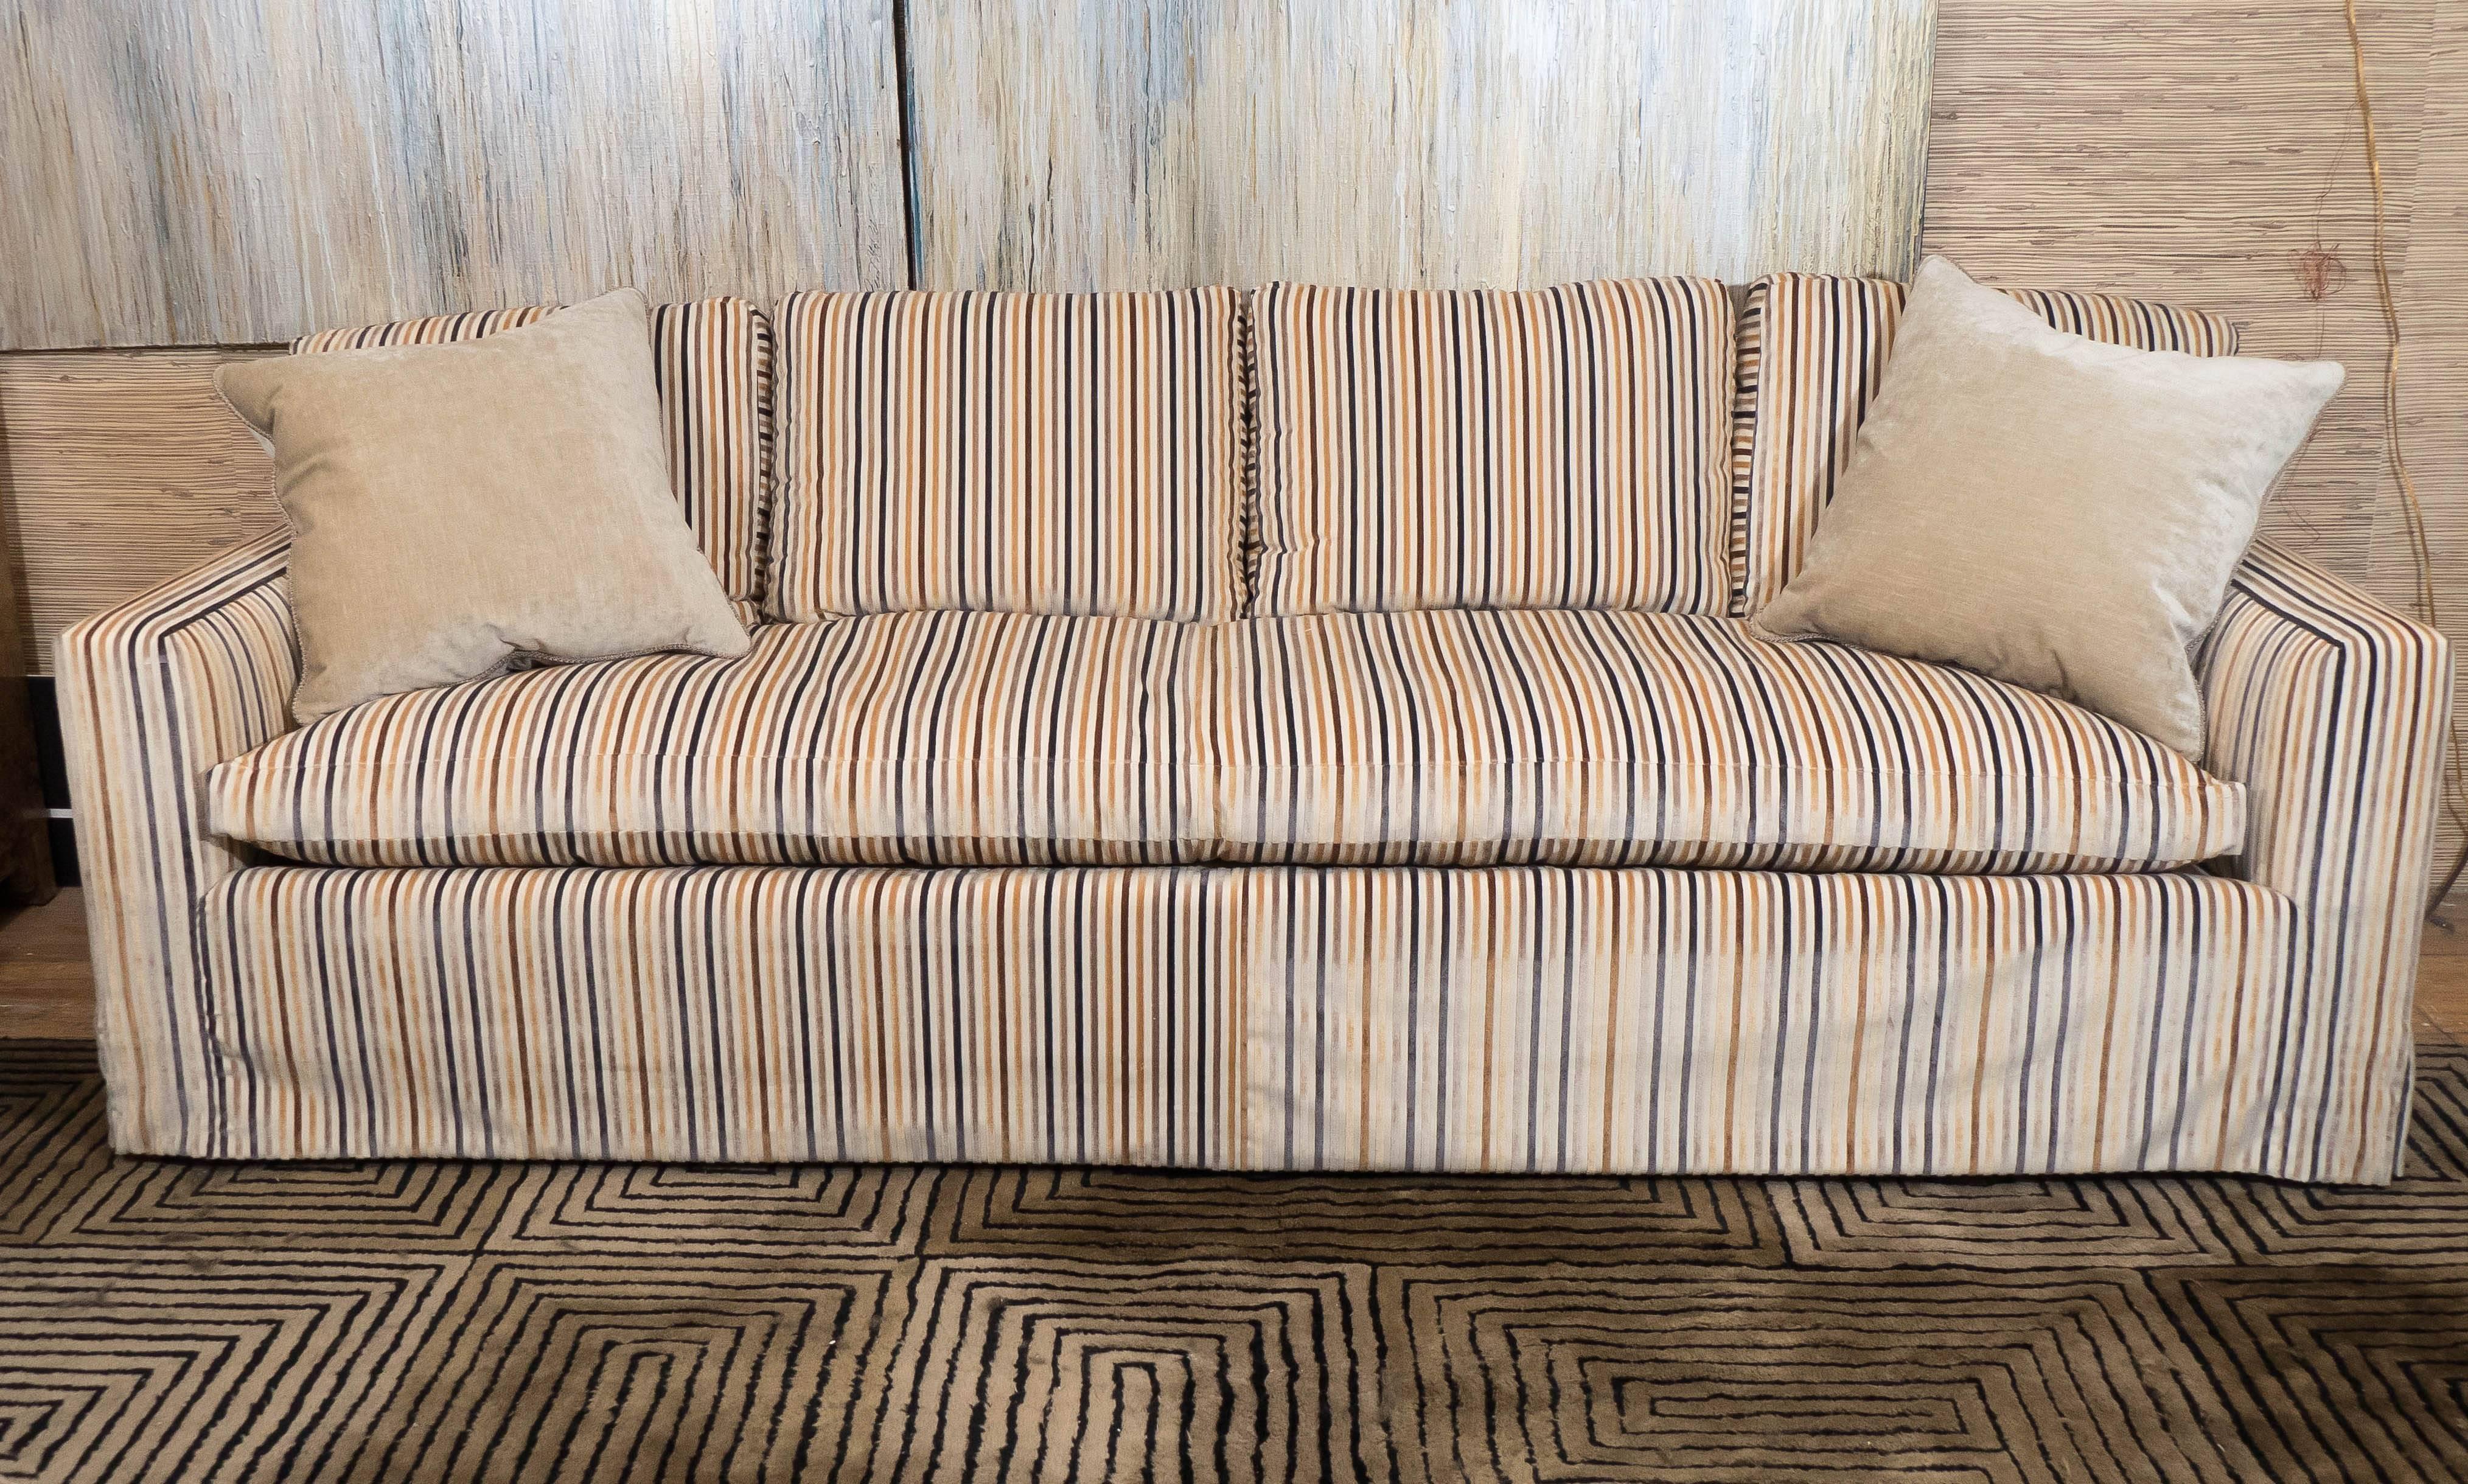 This down sofa, produced circa 1960s, comes upholstered in striped cut velvet, with track arms and bench seat. Very good vintage condition, consistent with age and use.